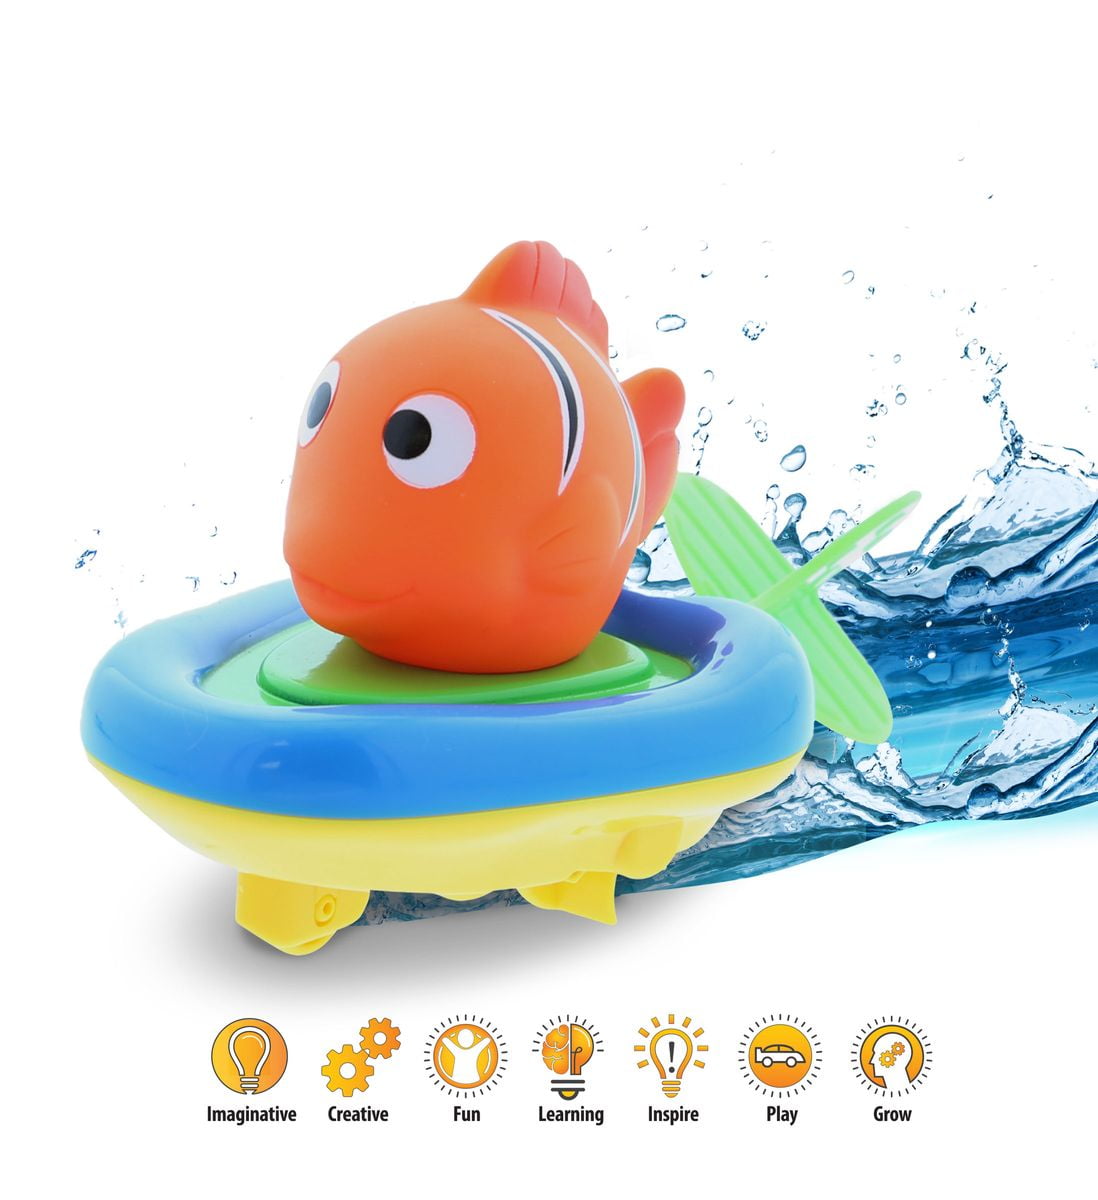 3 in 1 Game Duck Fun Educational Bath Toy Finger Puppet Pull and Go Water Racing Lake Pal for Shower Pool Bathtub Swim Hard Surfaces for Baby Toddler and Boy 6 Inch DolliBu Boat Racer Buddy 